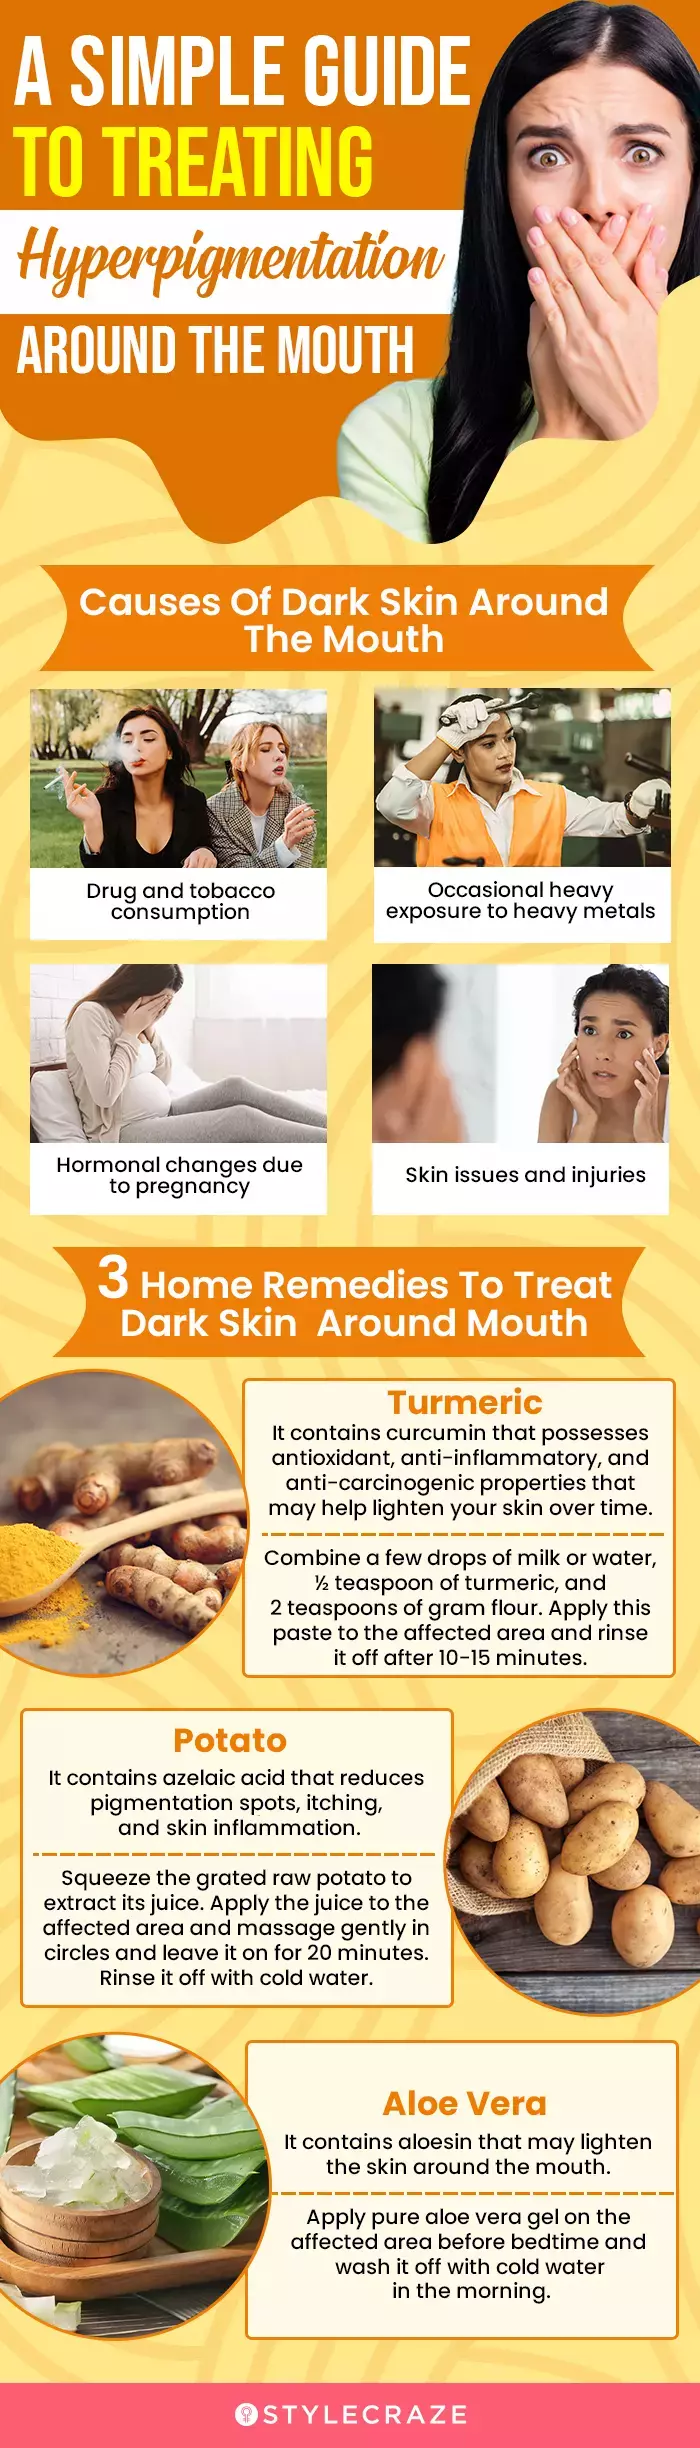 a simple guide to treating hyperpigmentation around the mouth (infographic)